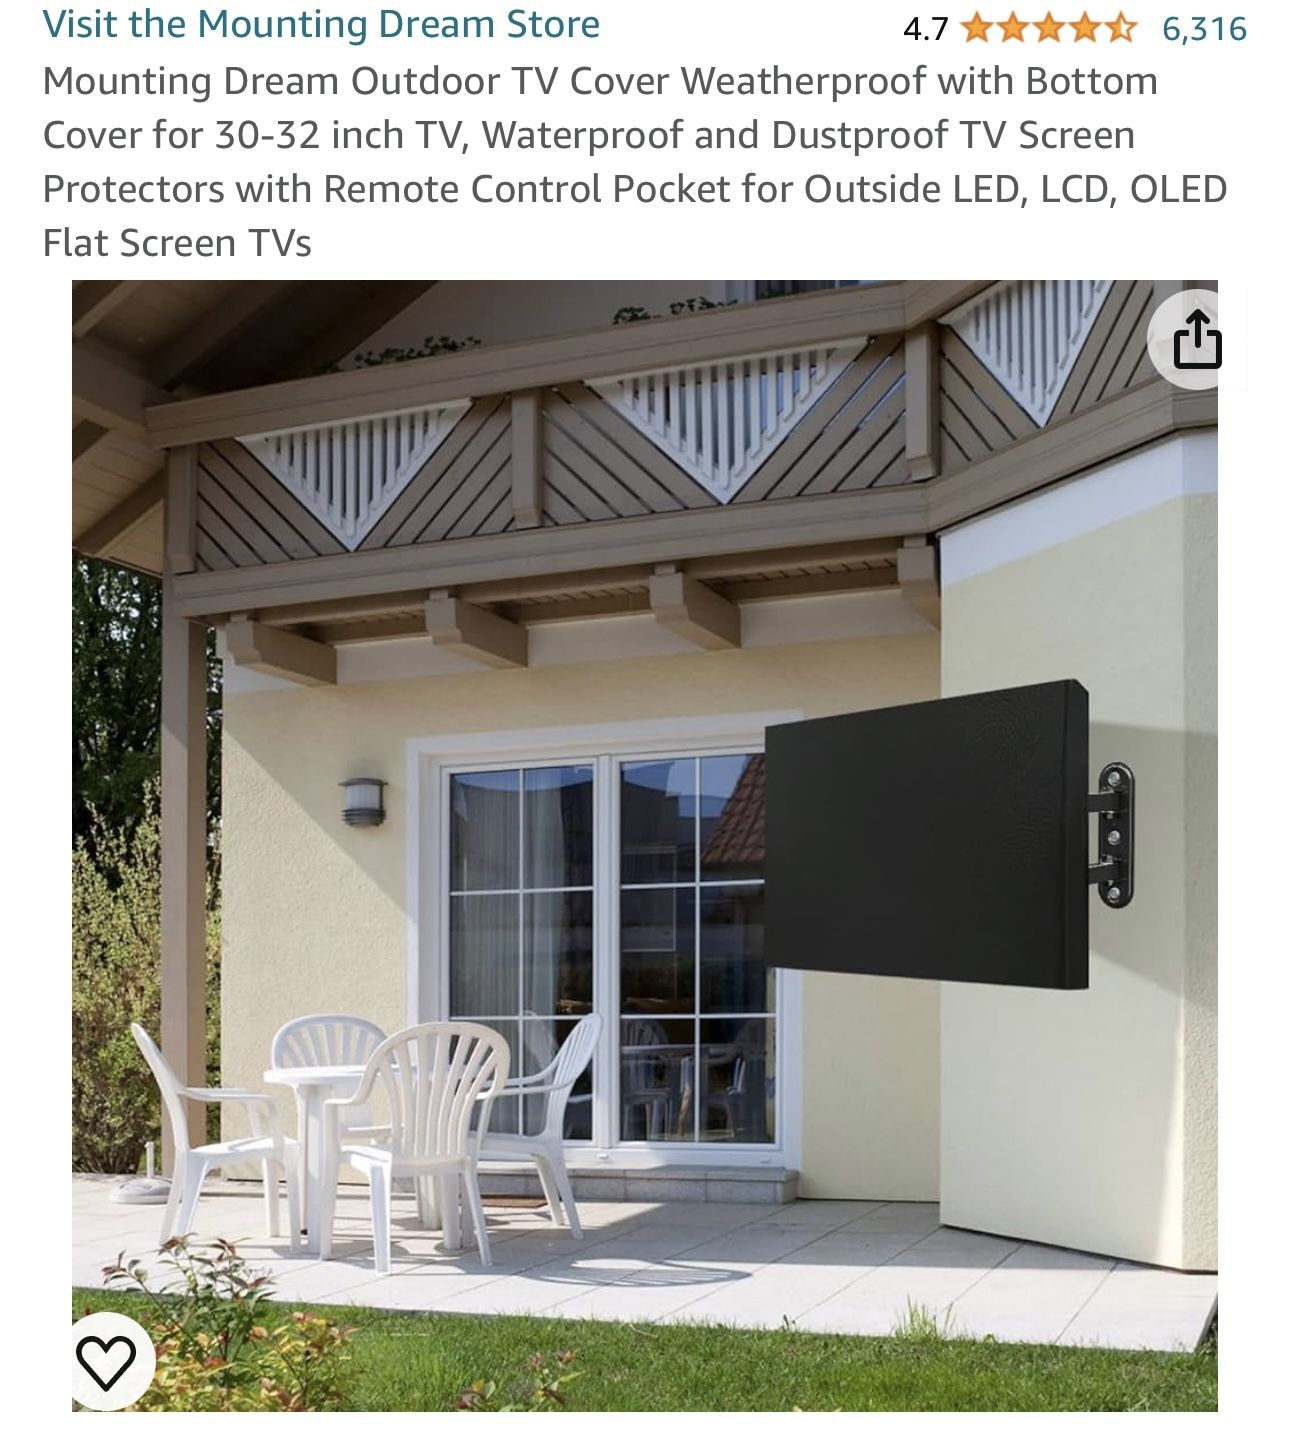 Outdoor 30-32’ TV Cover